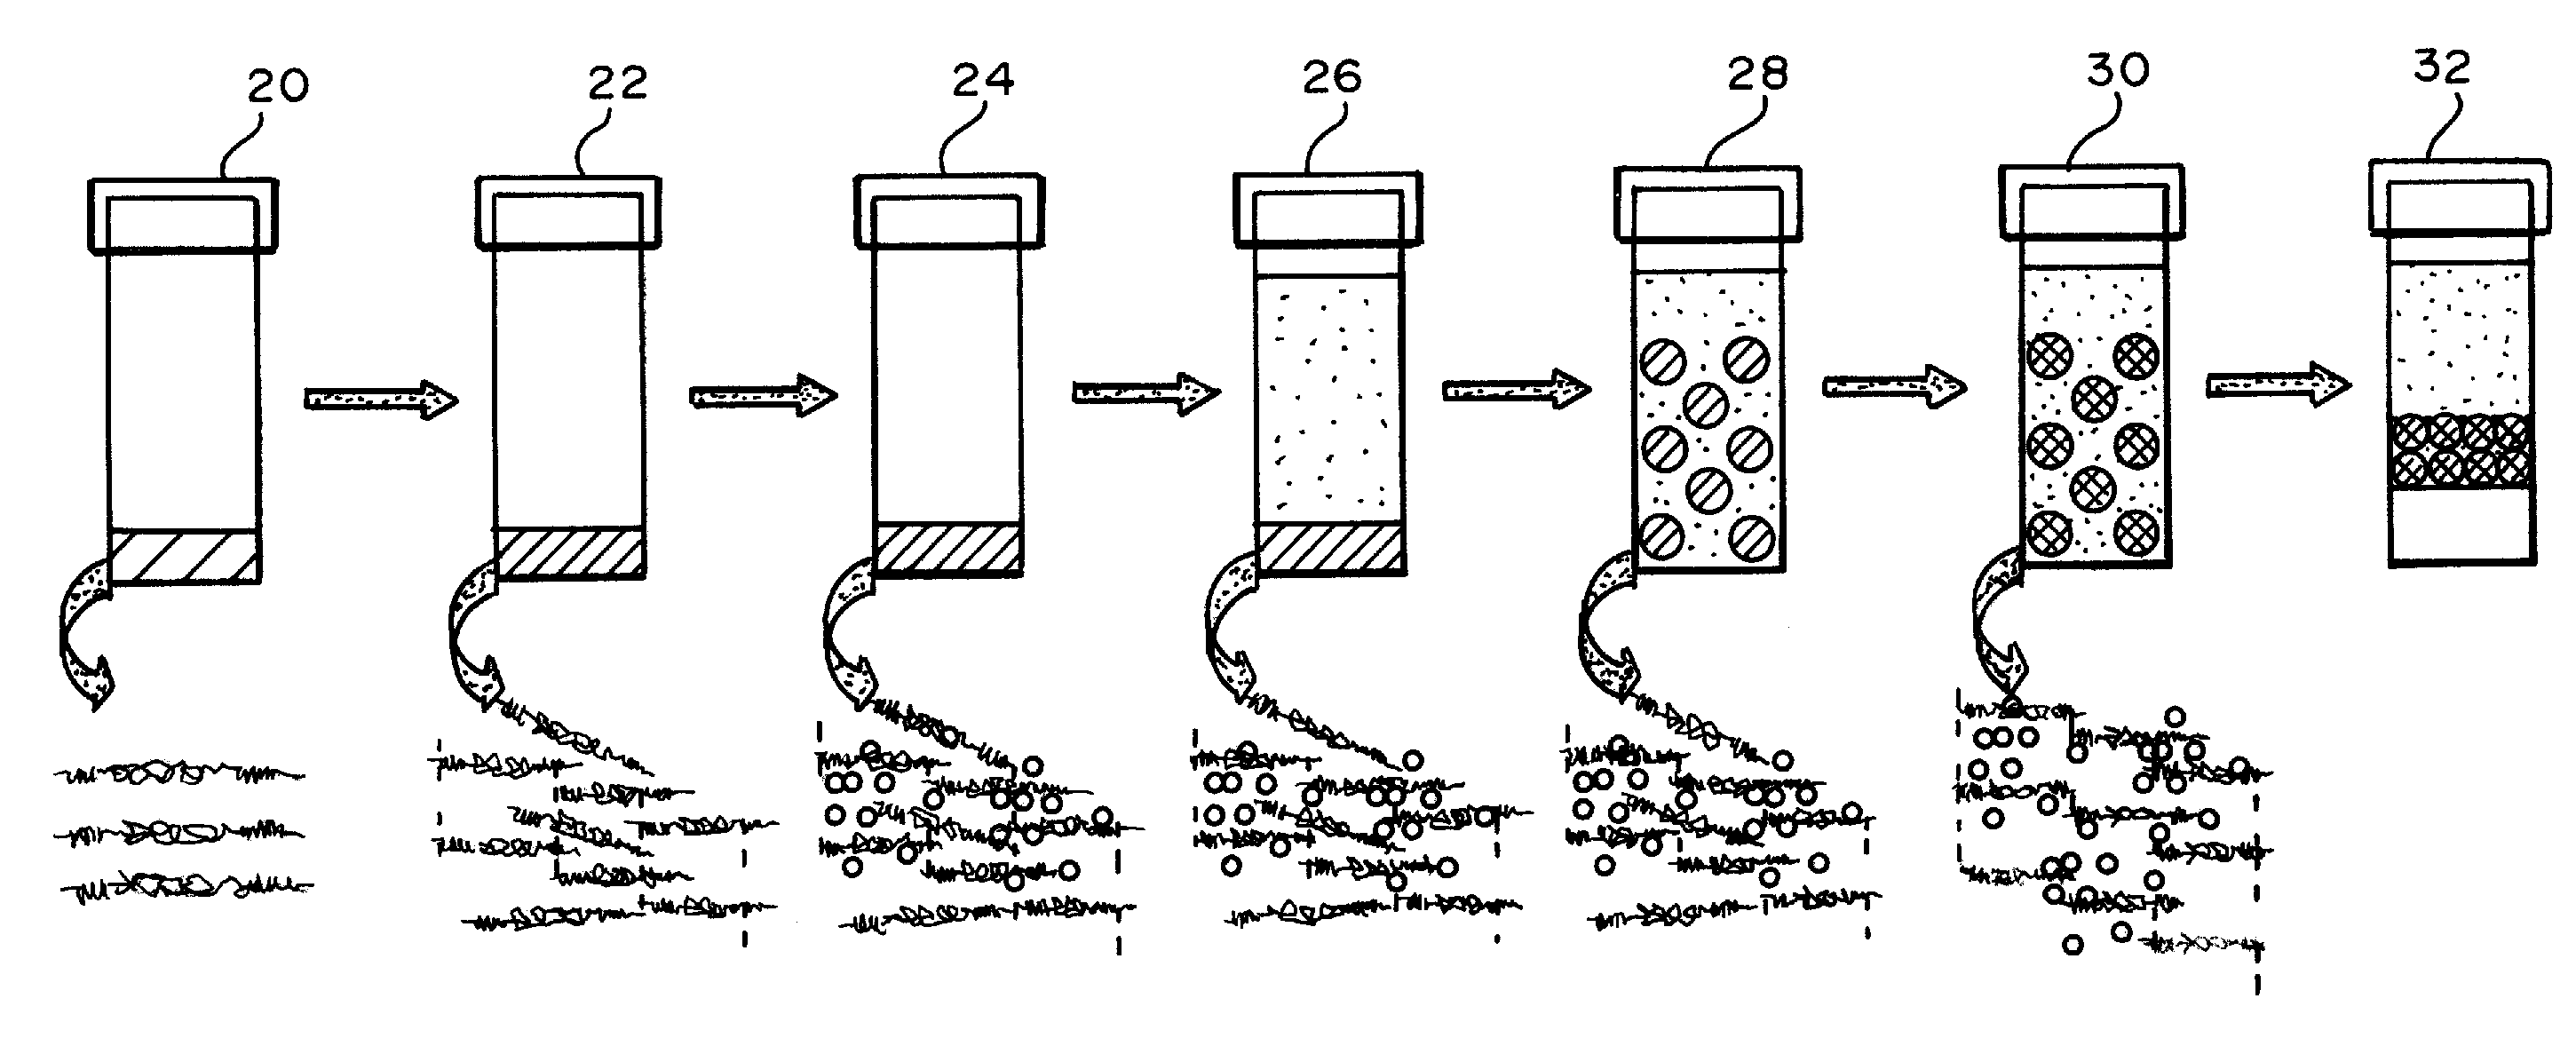 Collagen-based microspheres and methods of preparation and uses thereof